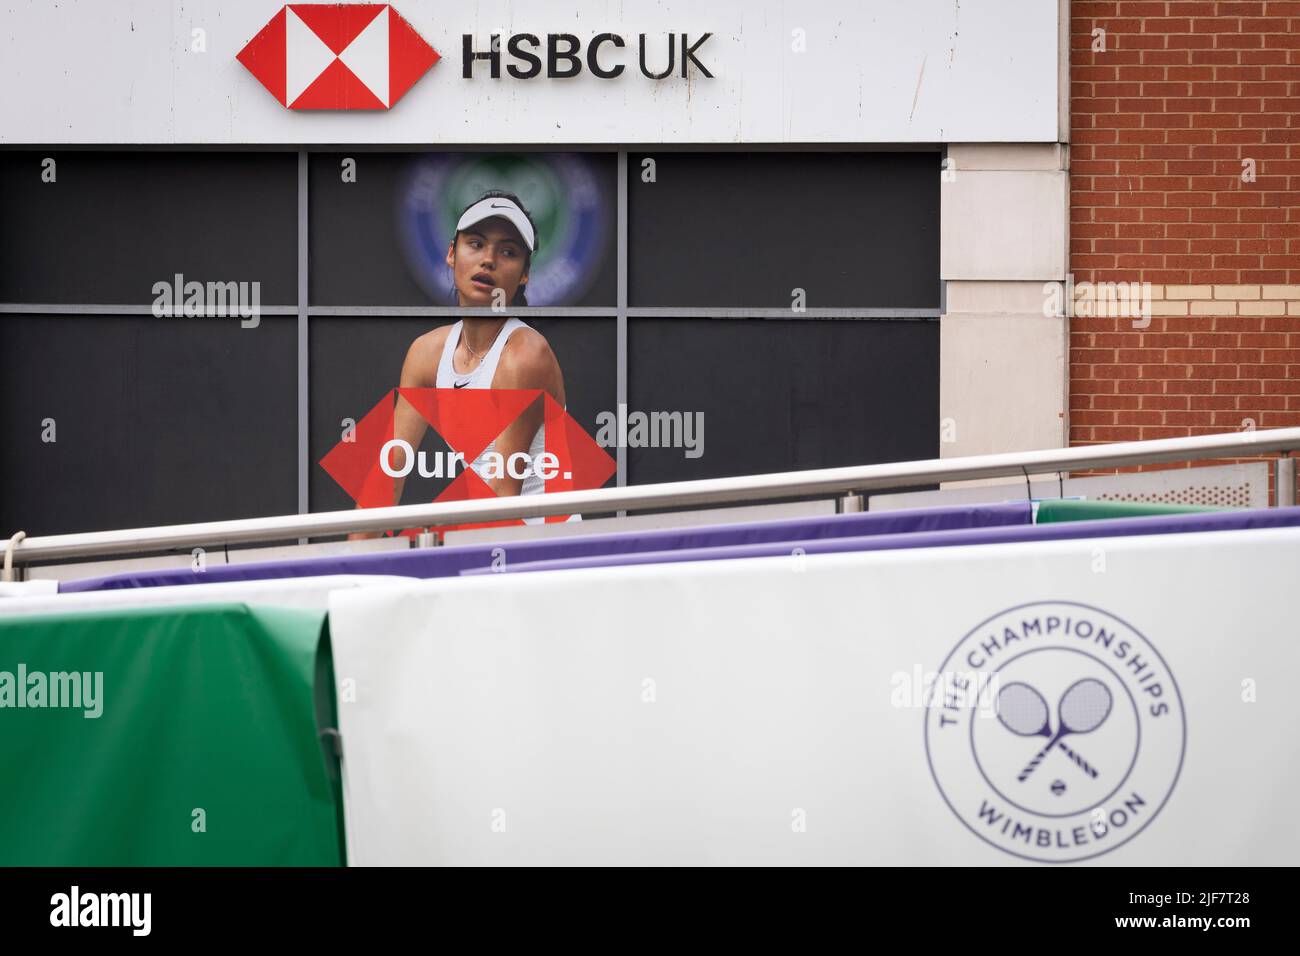 British tennis player, Emma Raducanu who is sponsored by HSBC appears on a giant billboard in Wimbledon town centre, during the first week of competition of the Wimbledon Lawn Tennis Association championships, on 30th June 2022, in London, England. Raducanu, whose parents both work in the financial industry, already has sponsorship deals with Porsche, Tiffany and Co, British Airways, Evian, Dior and Vodafone. HSBC is also a major Wimbledon sponsor but a UK parliamentarian group has called on Wimbledon to drop the brand over the bank’s support of the controversial national security law in Hong Stock Photo